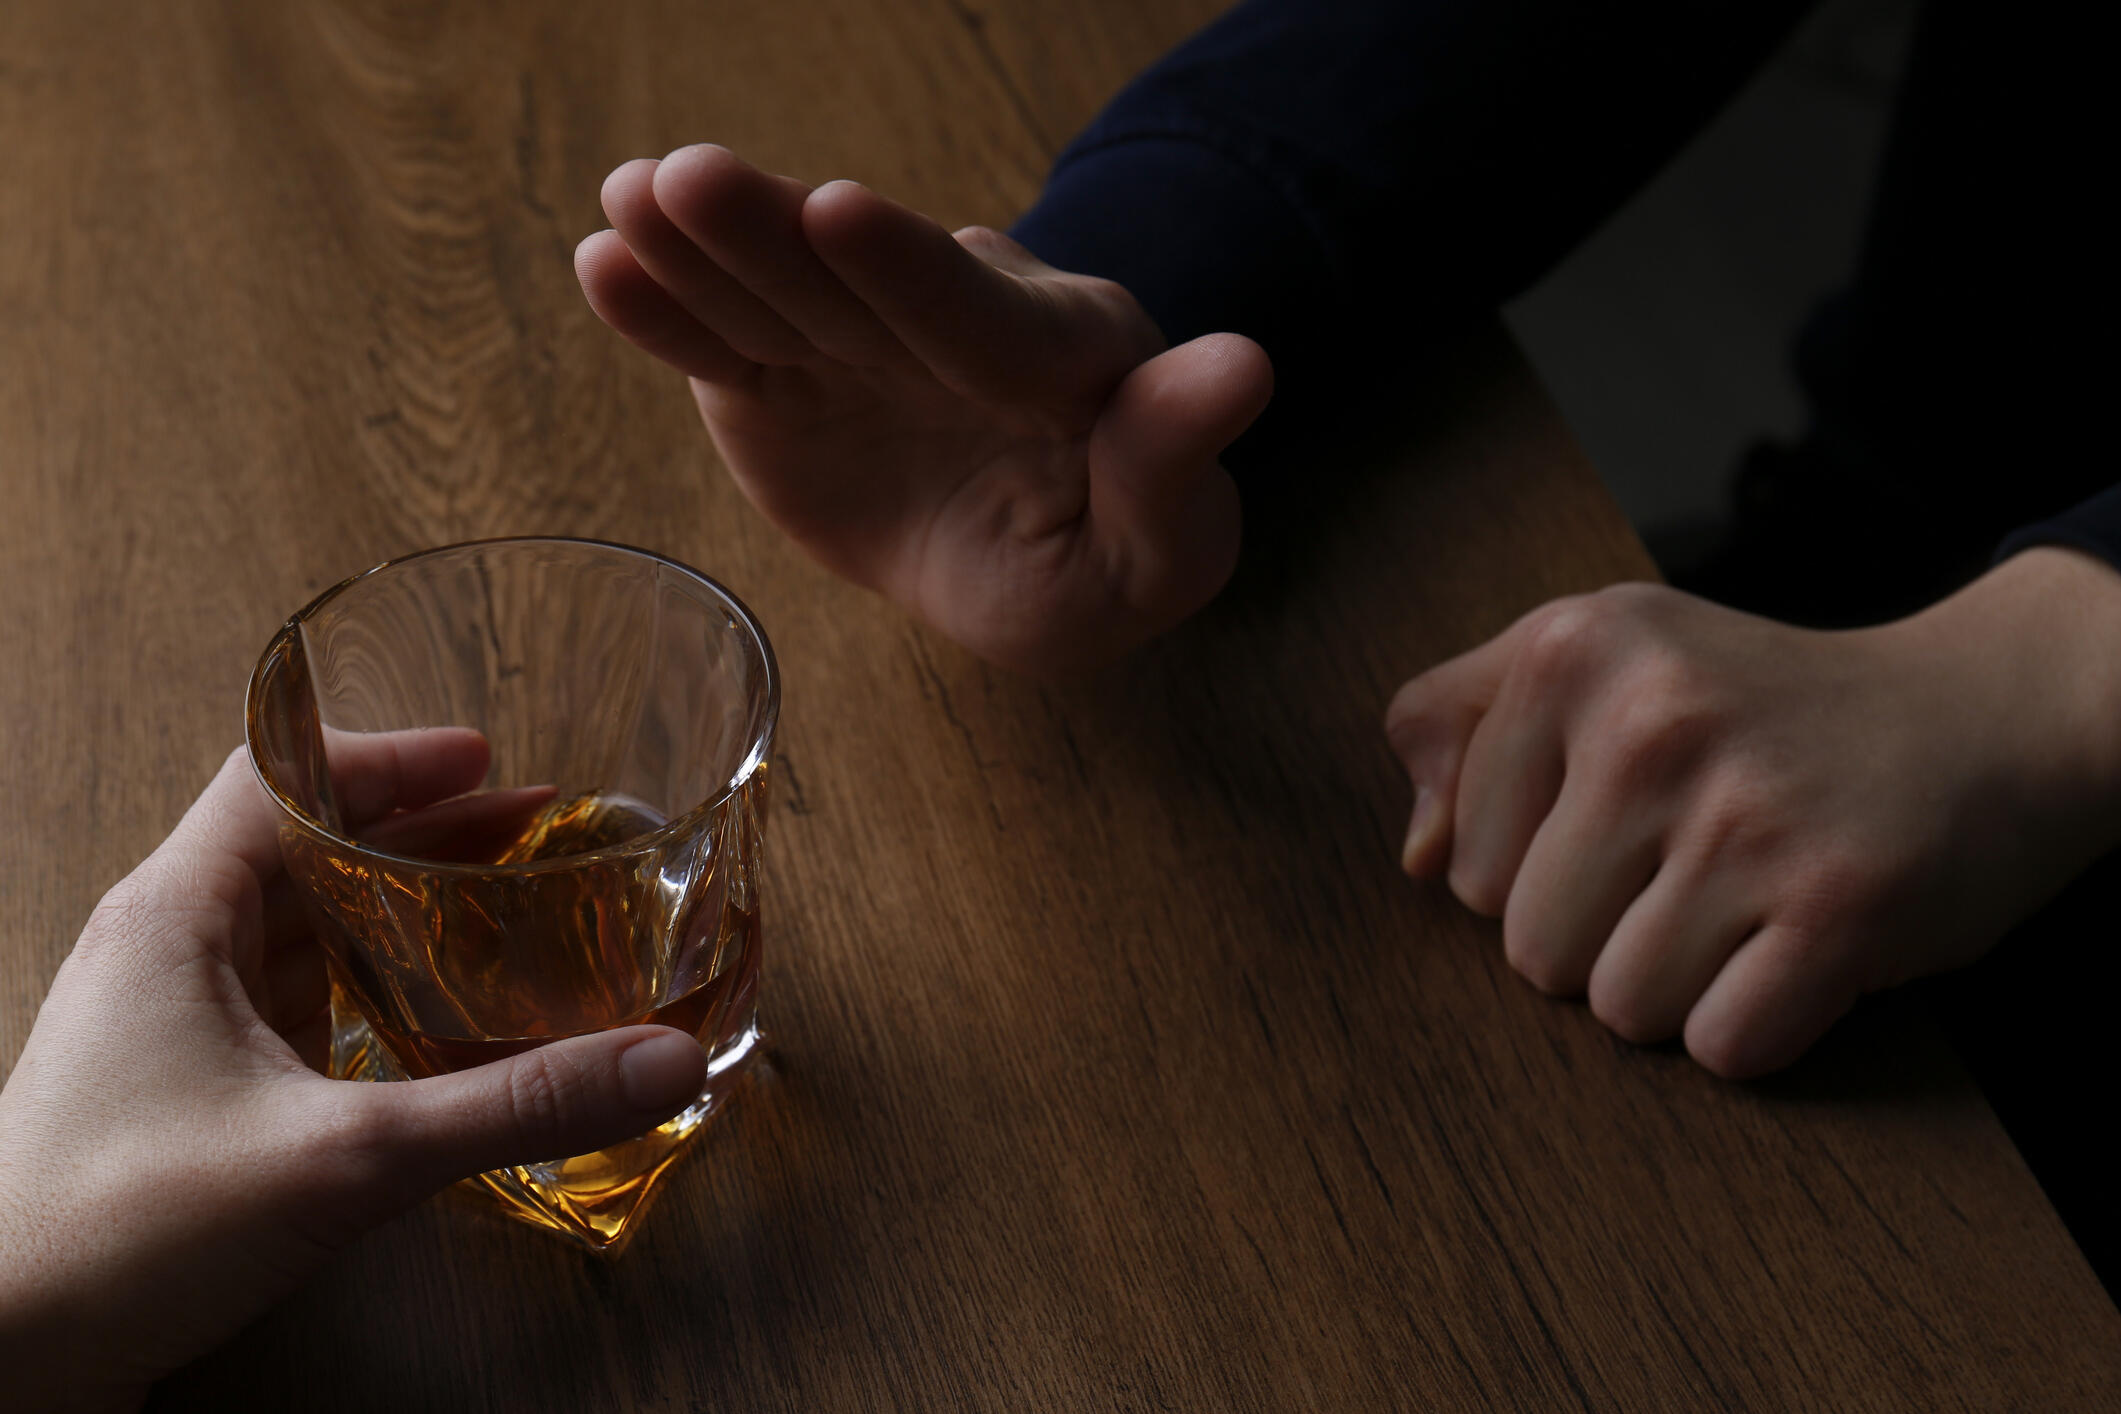 A hand on the left is holding a cup with brown liquid and a hand on the right is pointing upward in a \"stop\" gesture. 